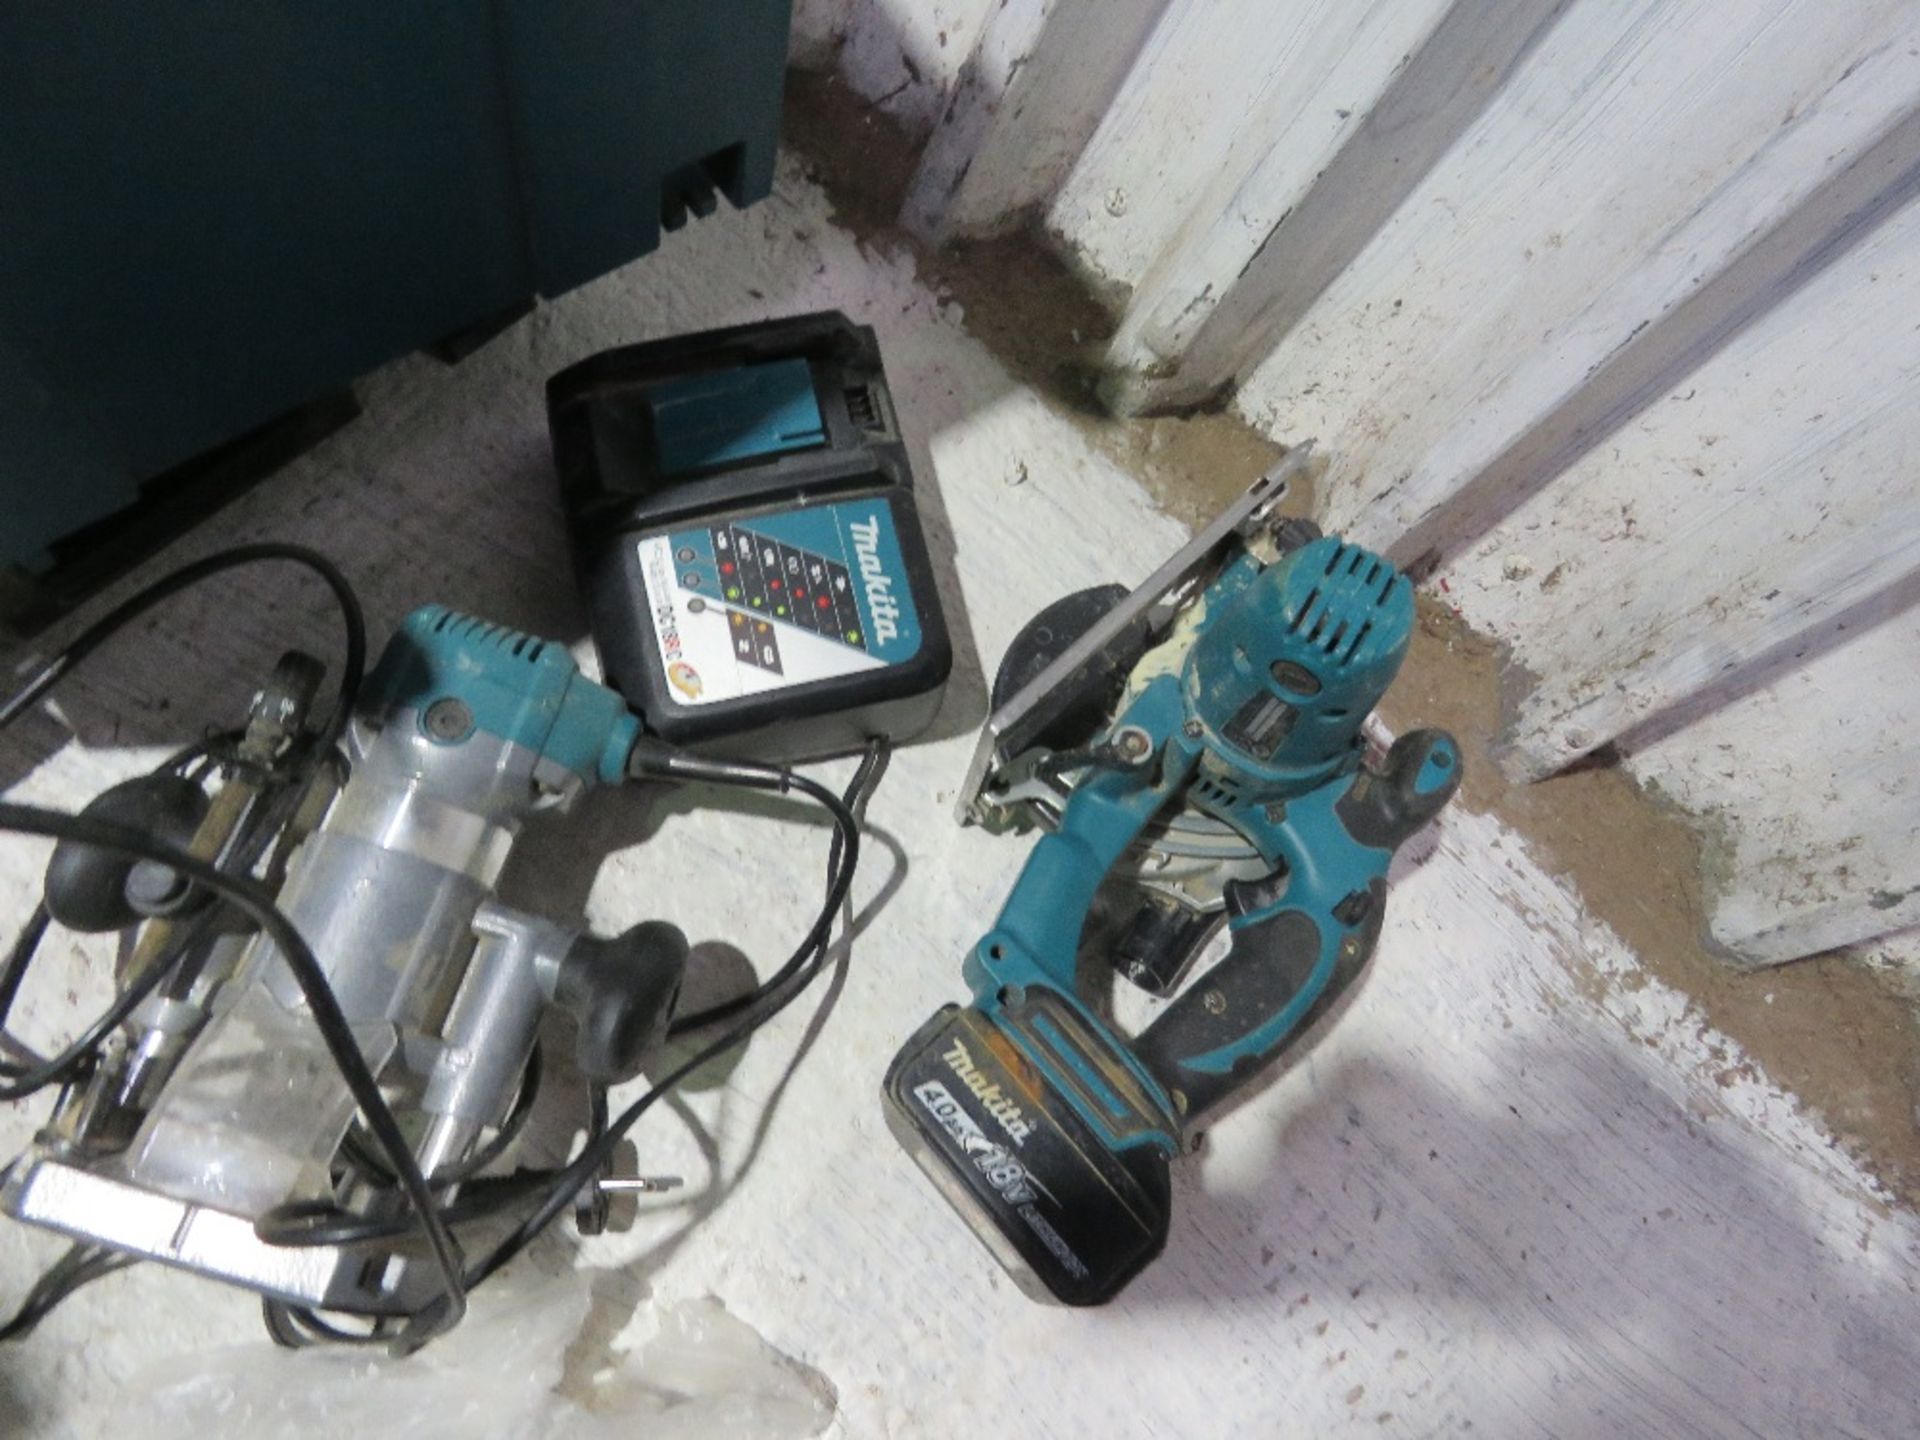 MAKITA TOOLS X 3: BATTERY CIRCULAR SAW, ELECTRIC ROUTER & CORE DRILL. - Image 3 of 9